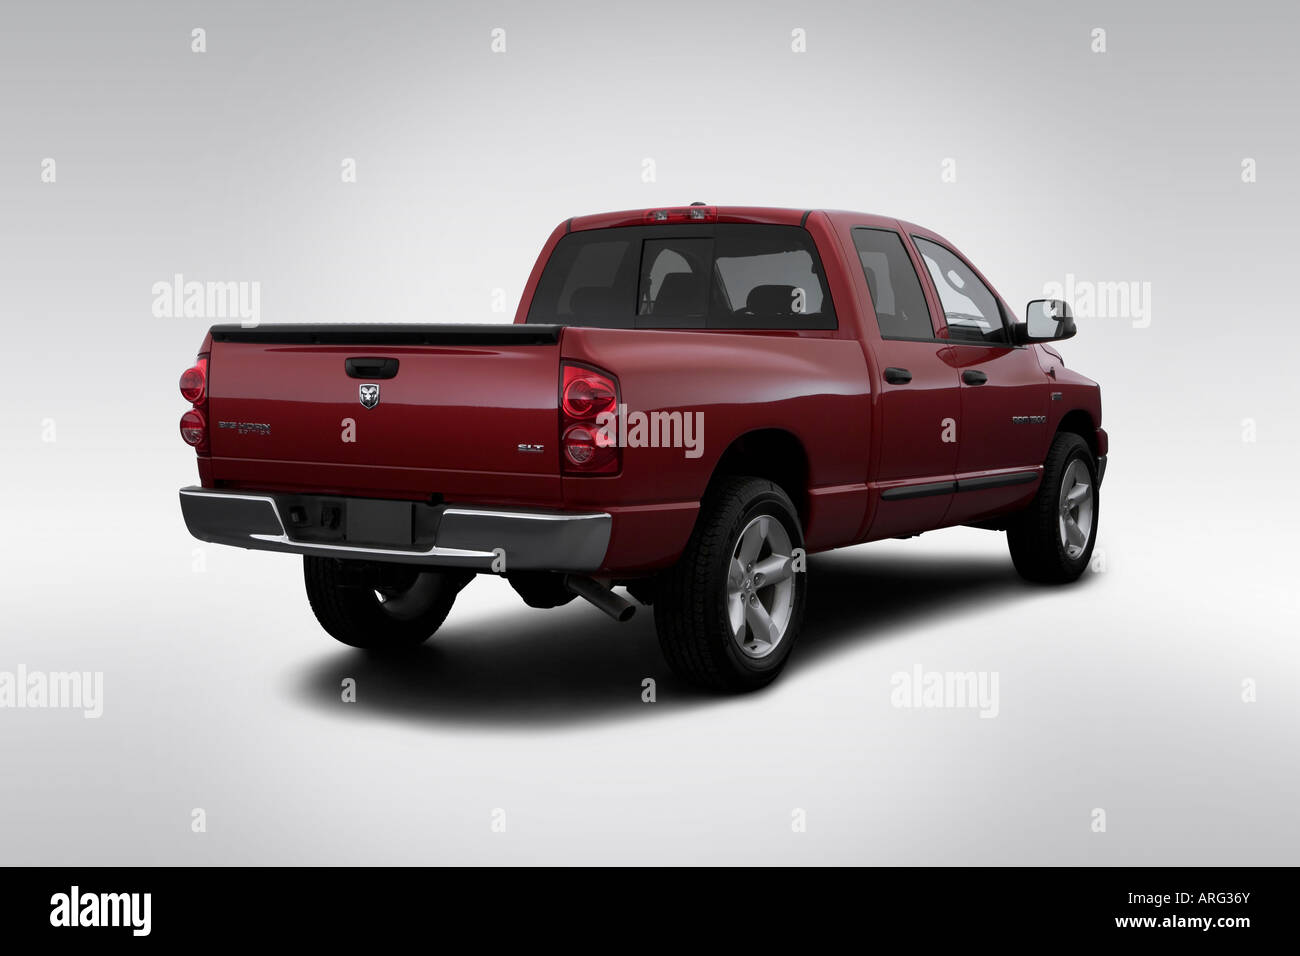 2007 Dodge 1500 SLT in Red - Rear angle Stock Photo - Alamy